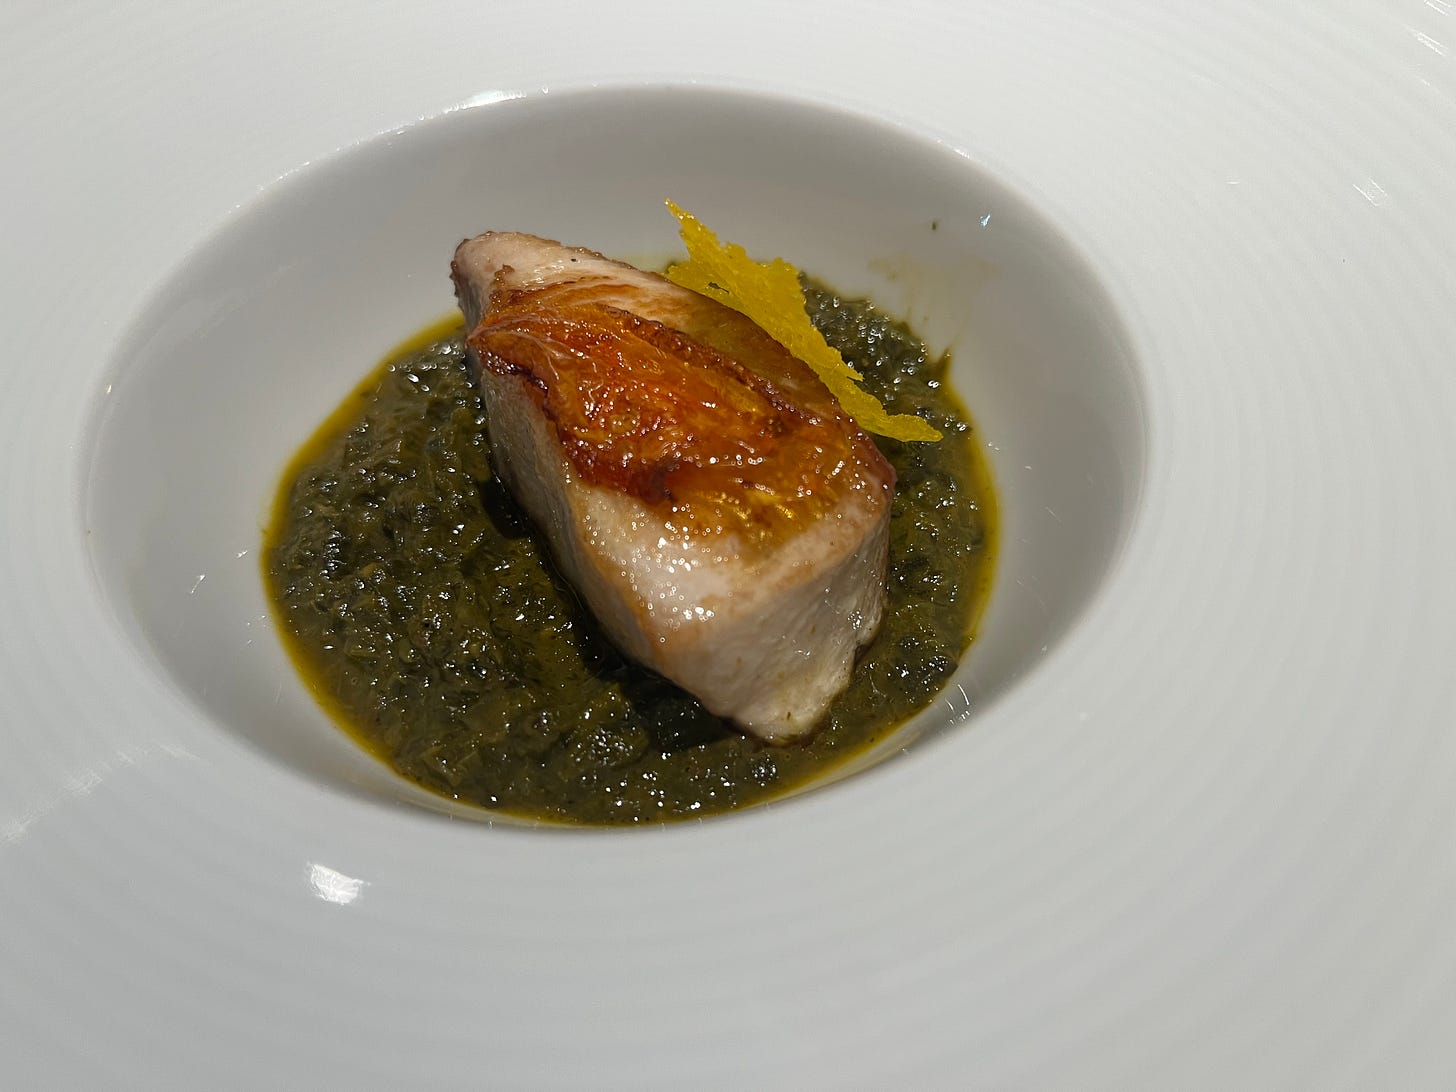 A piece of grilled fish on a green sauce, with a yellow chip on top